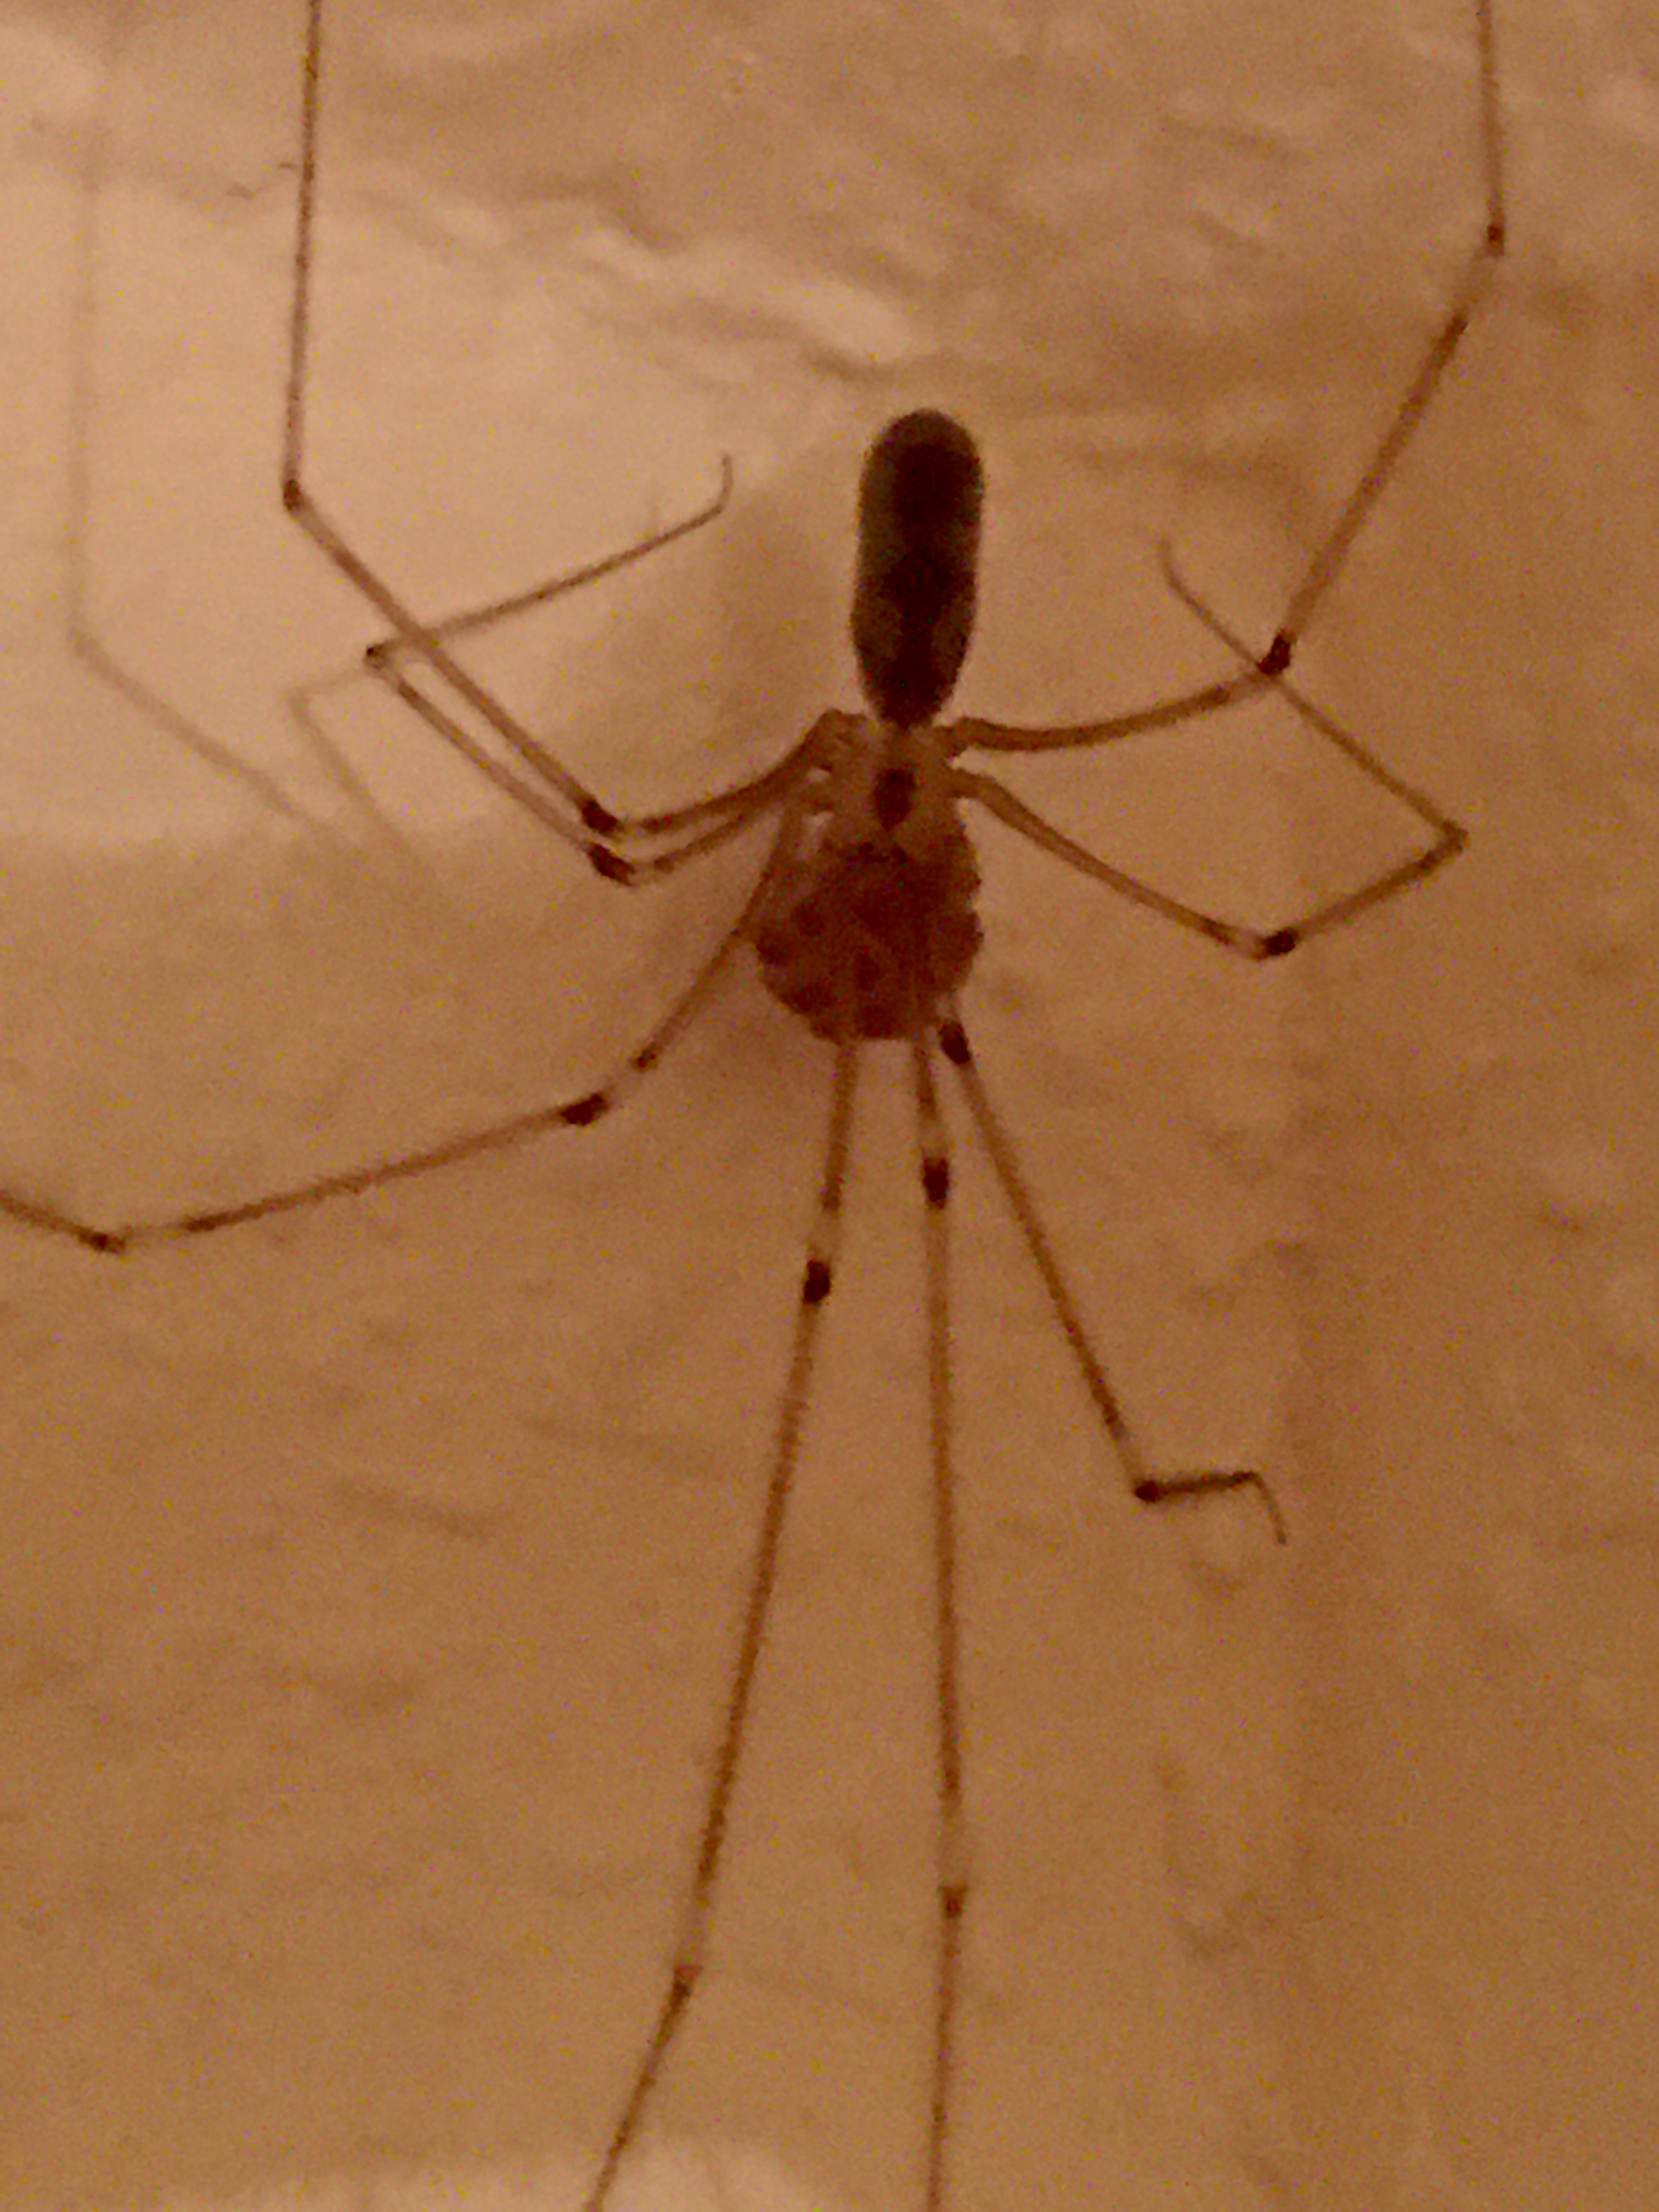 Spider Sleuthing in The San Juans – Day 6, Mommy Long Legs!